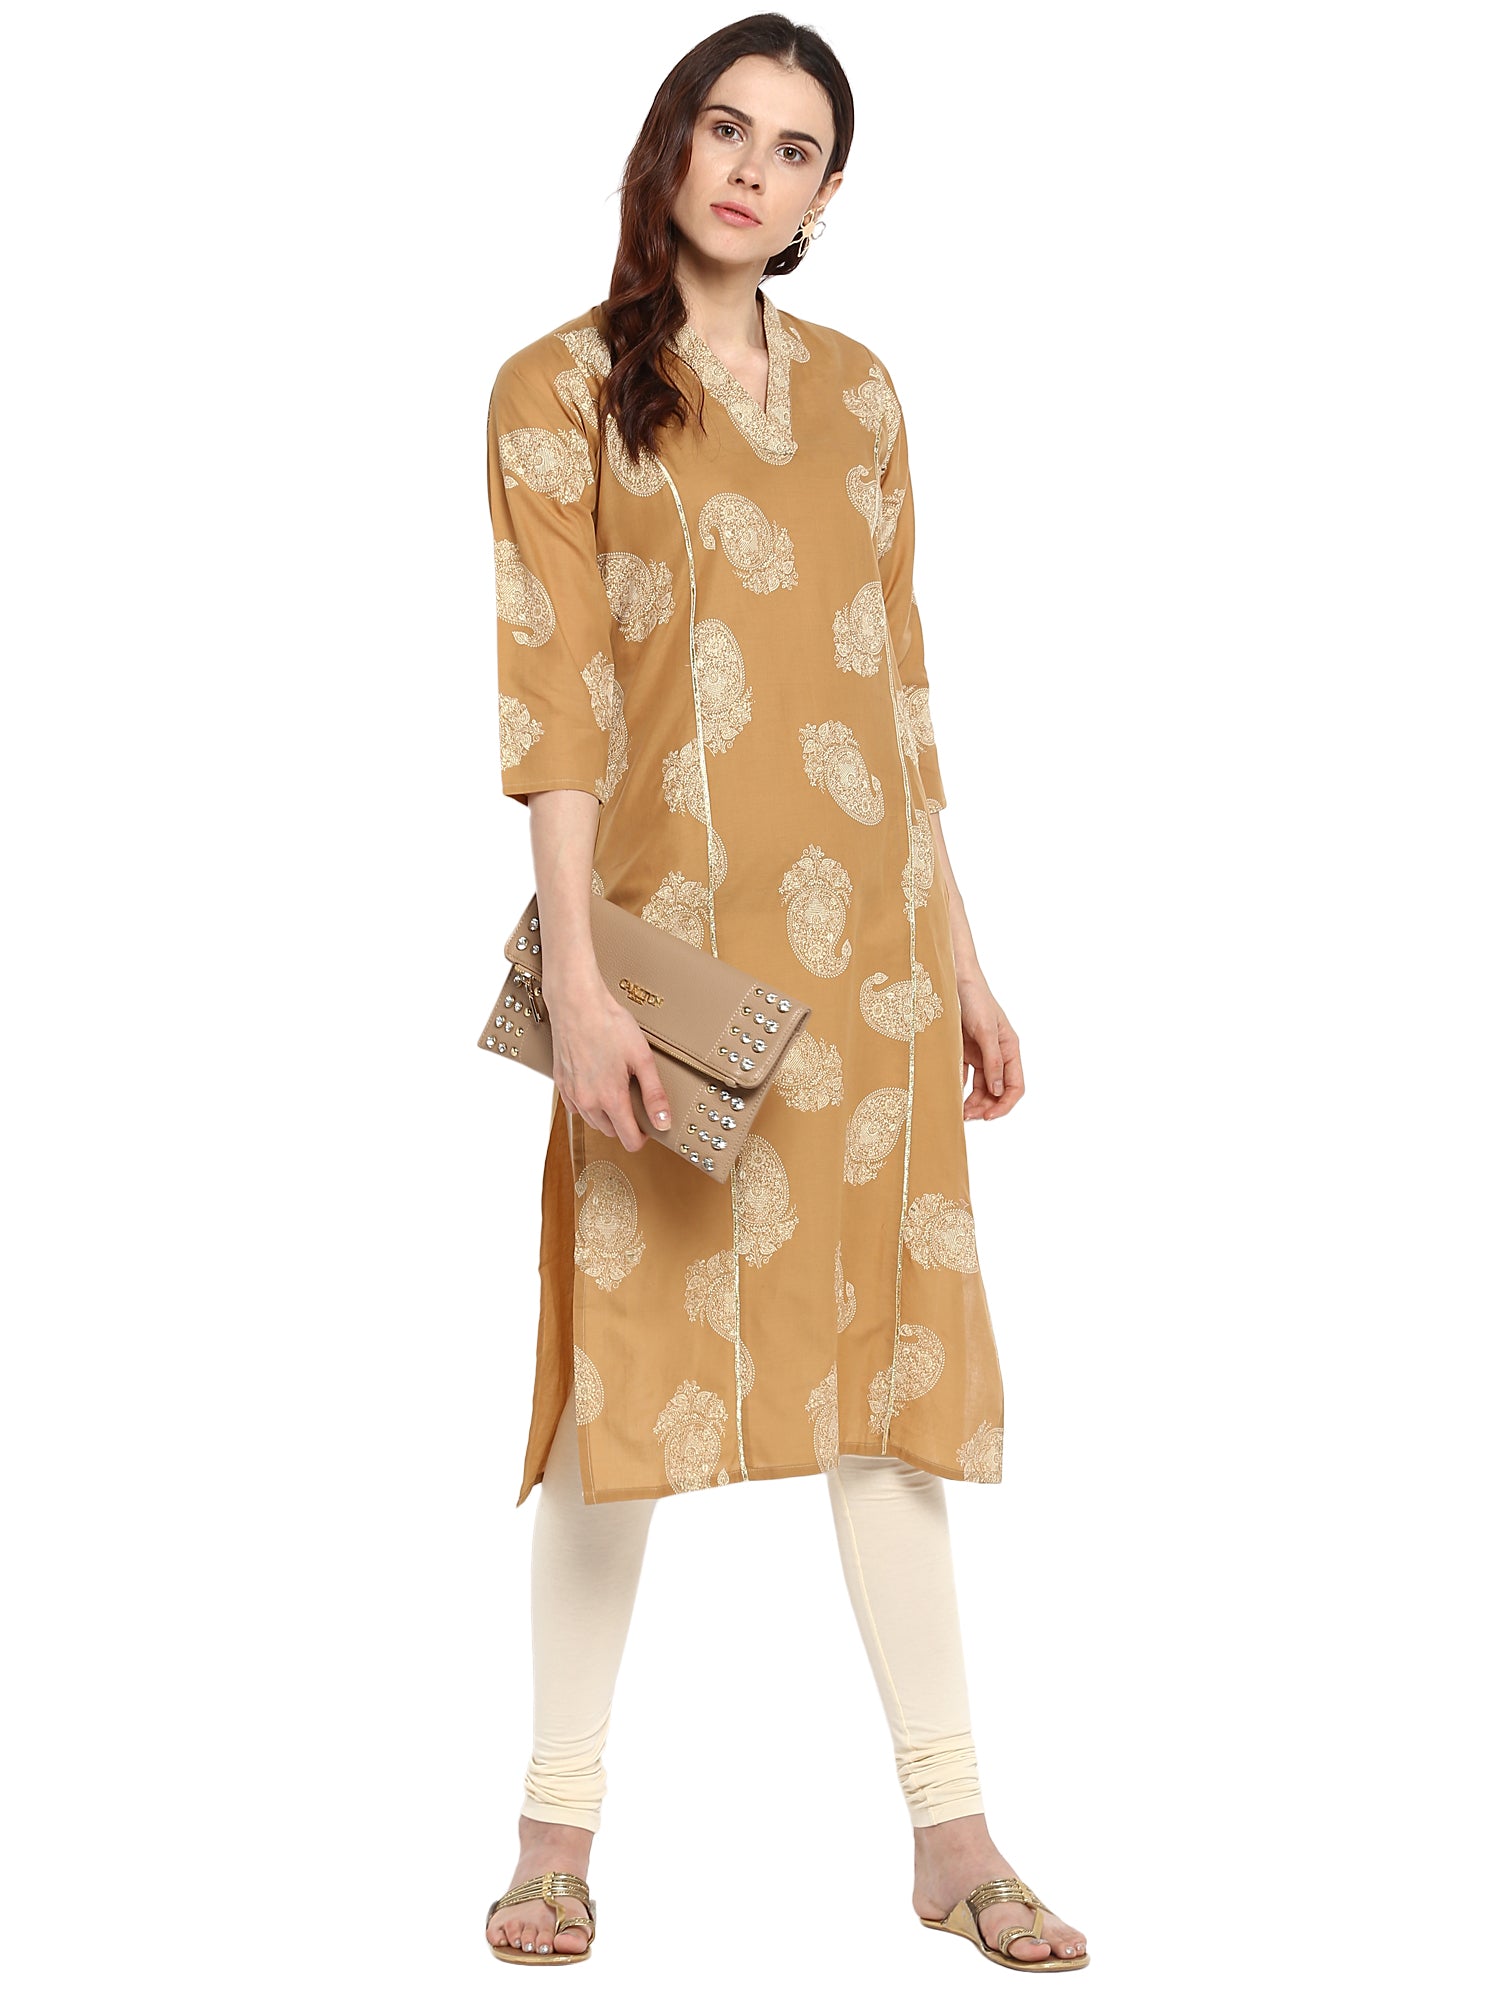 Women's Beige Printed Cotton Only Kurta With Gota Patti Lace Highlights - Ahalyaa